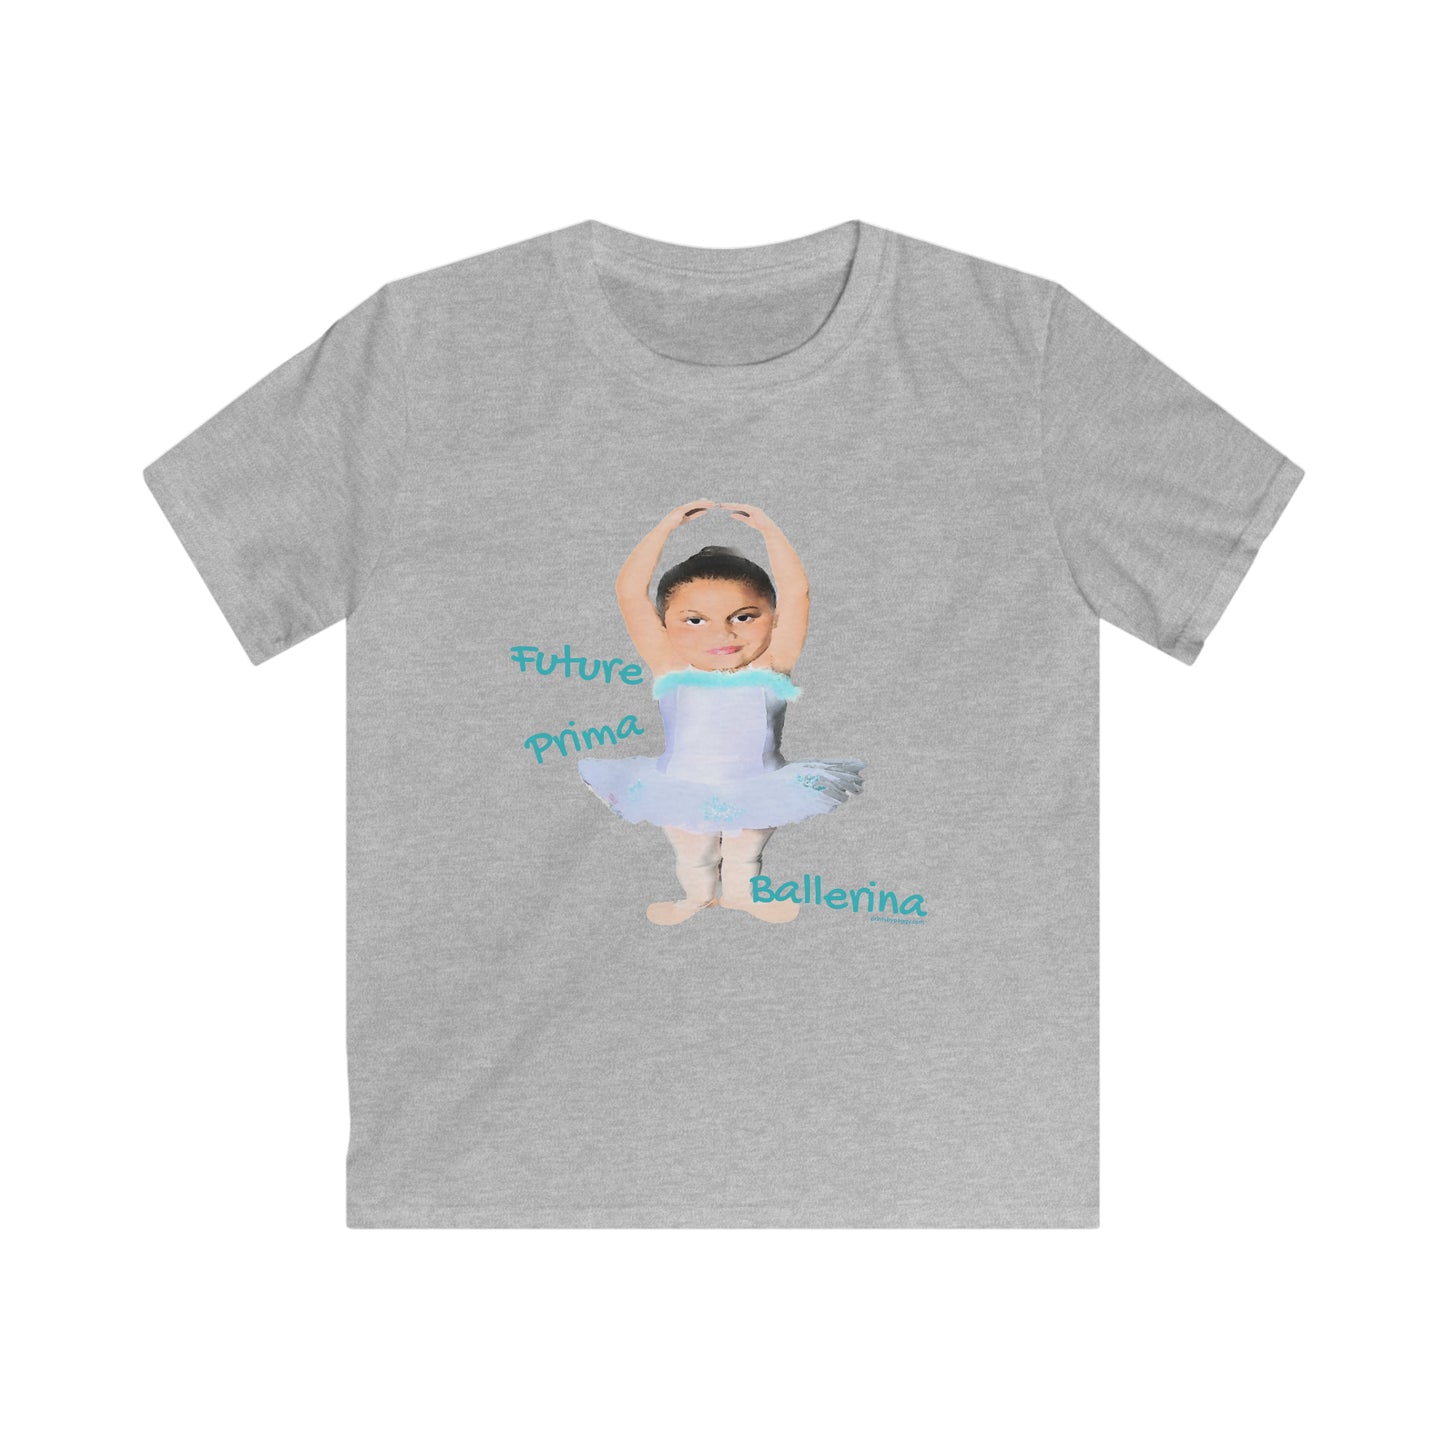 The back view of a gray tee shirt with a charachature of a little ballerina pictured with Future Prima Ballerina written in Blue